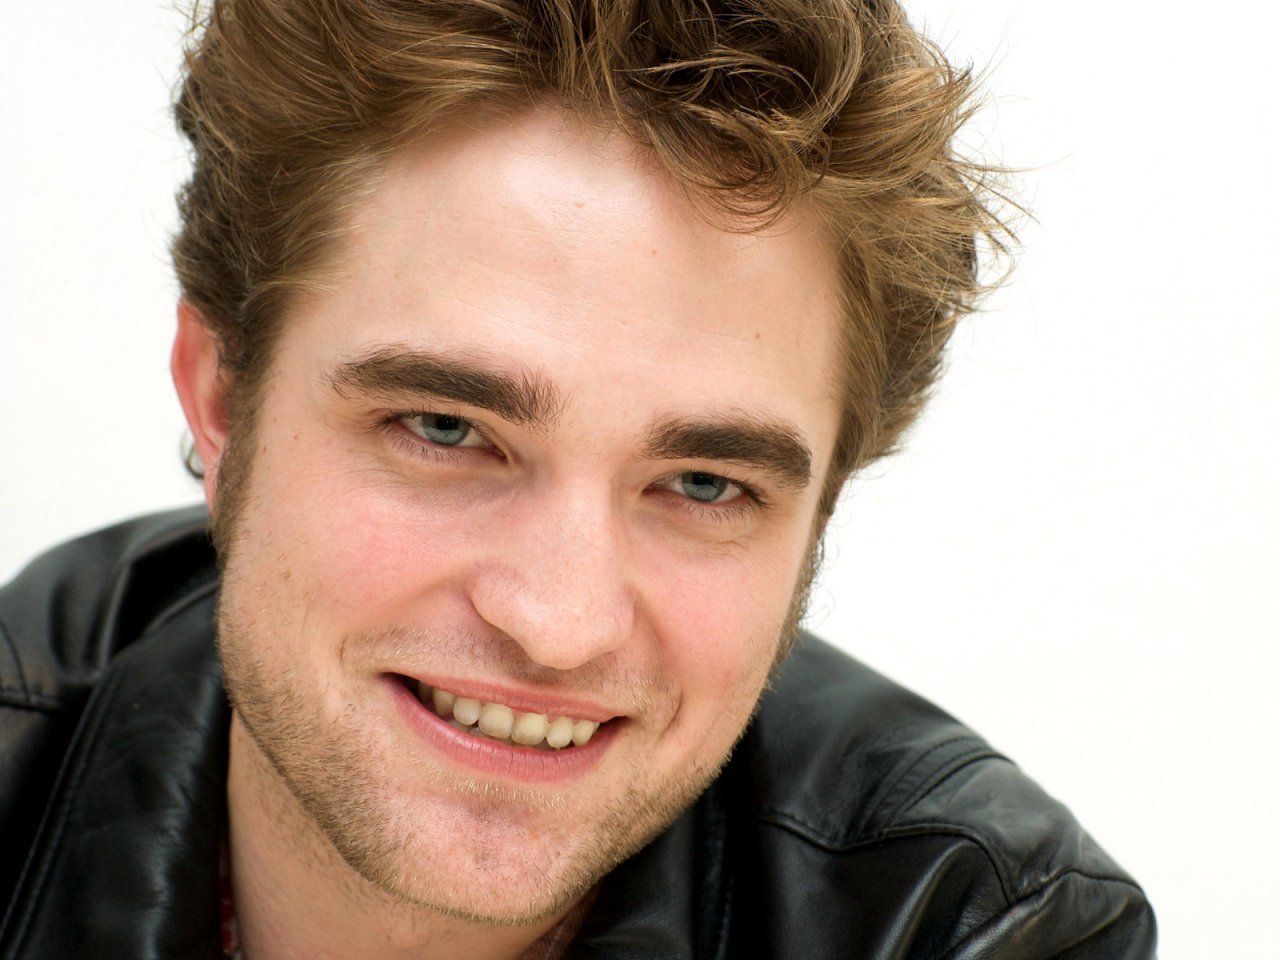 “I'm trying to see what my niche is,” says Robert Pattinson